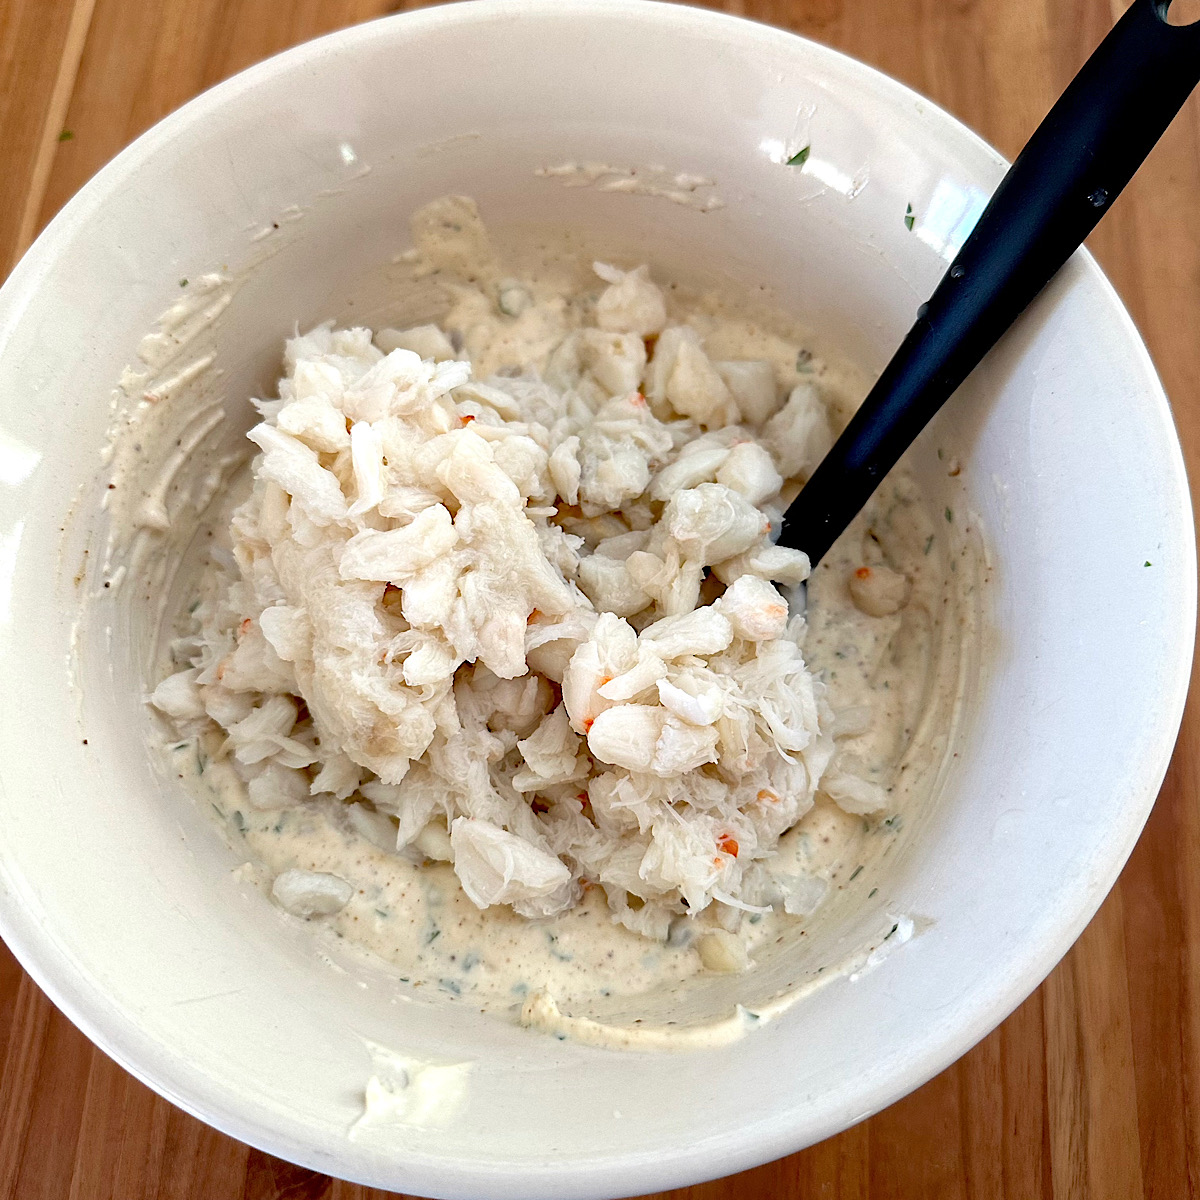 Crab salad (remoulade) in a white bowl with black spatula.